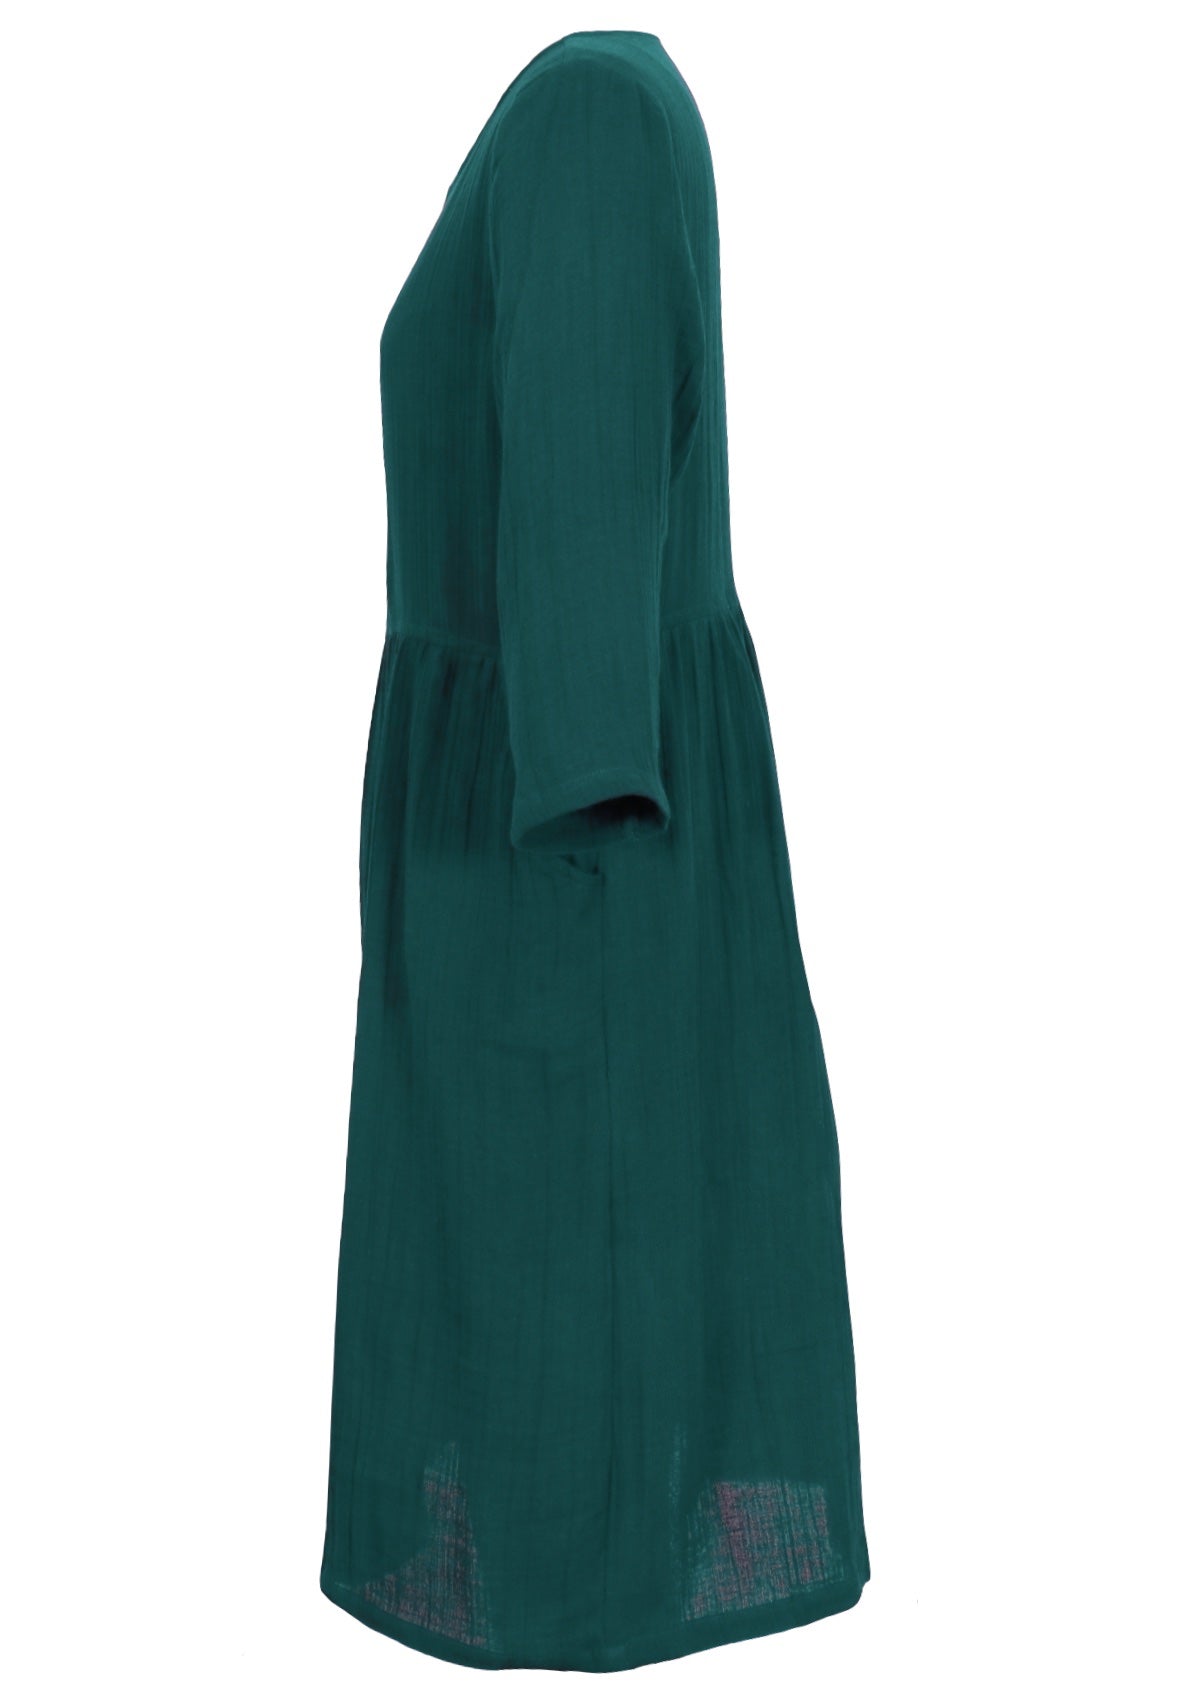 Double layer of lightweight cotton gauze dress in deep teal colour